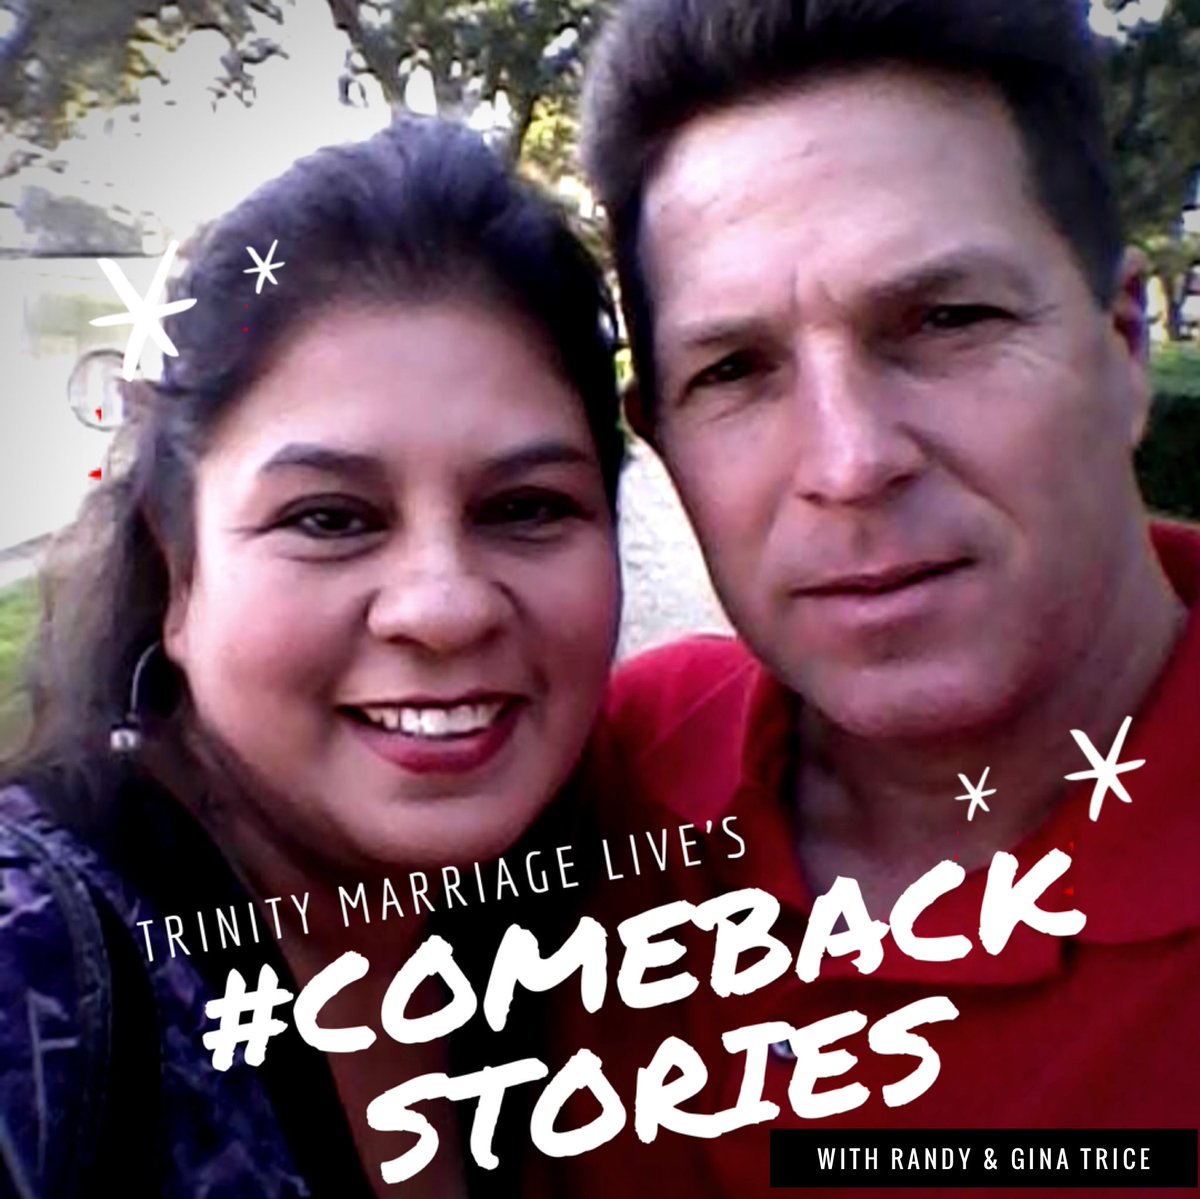 Join us this Wednesday at 7 in the Heritage room for #comebackstories with Randy & Gina Trice. 

Come out and hear the story of God’s faithfulness in their marriage and family. You don’t want to miss it. 

Friends, food, fun! Trinity Marriage is the place to be on Wednesdays.